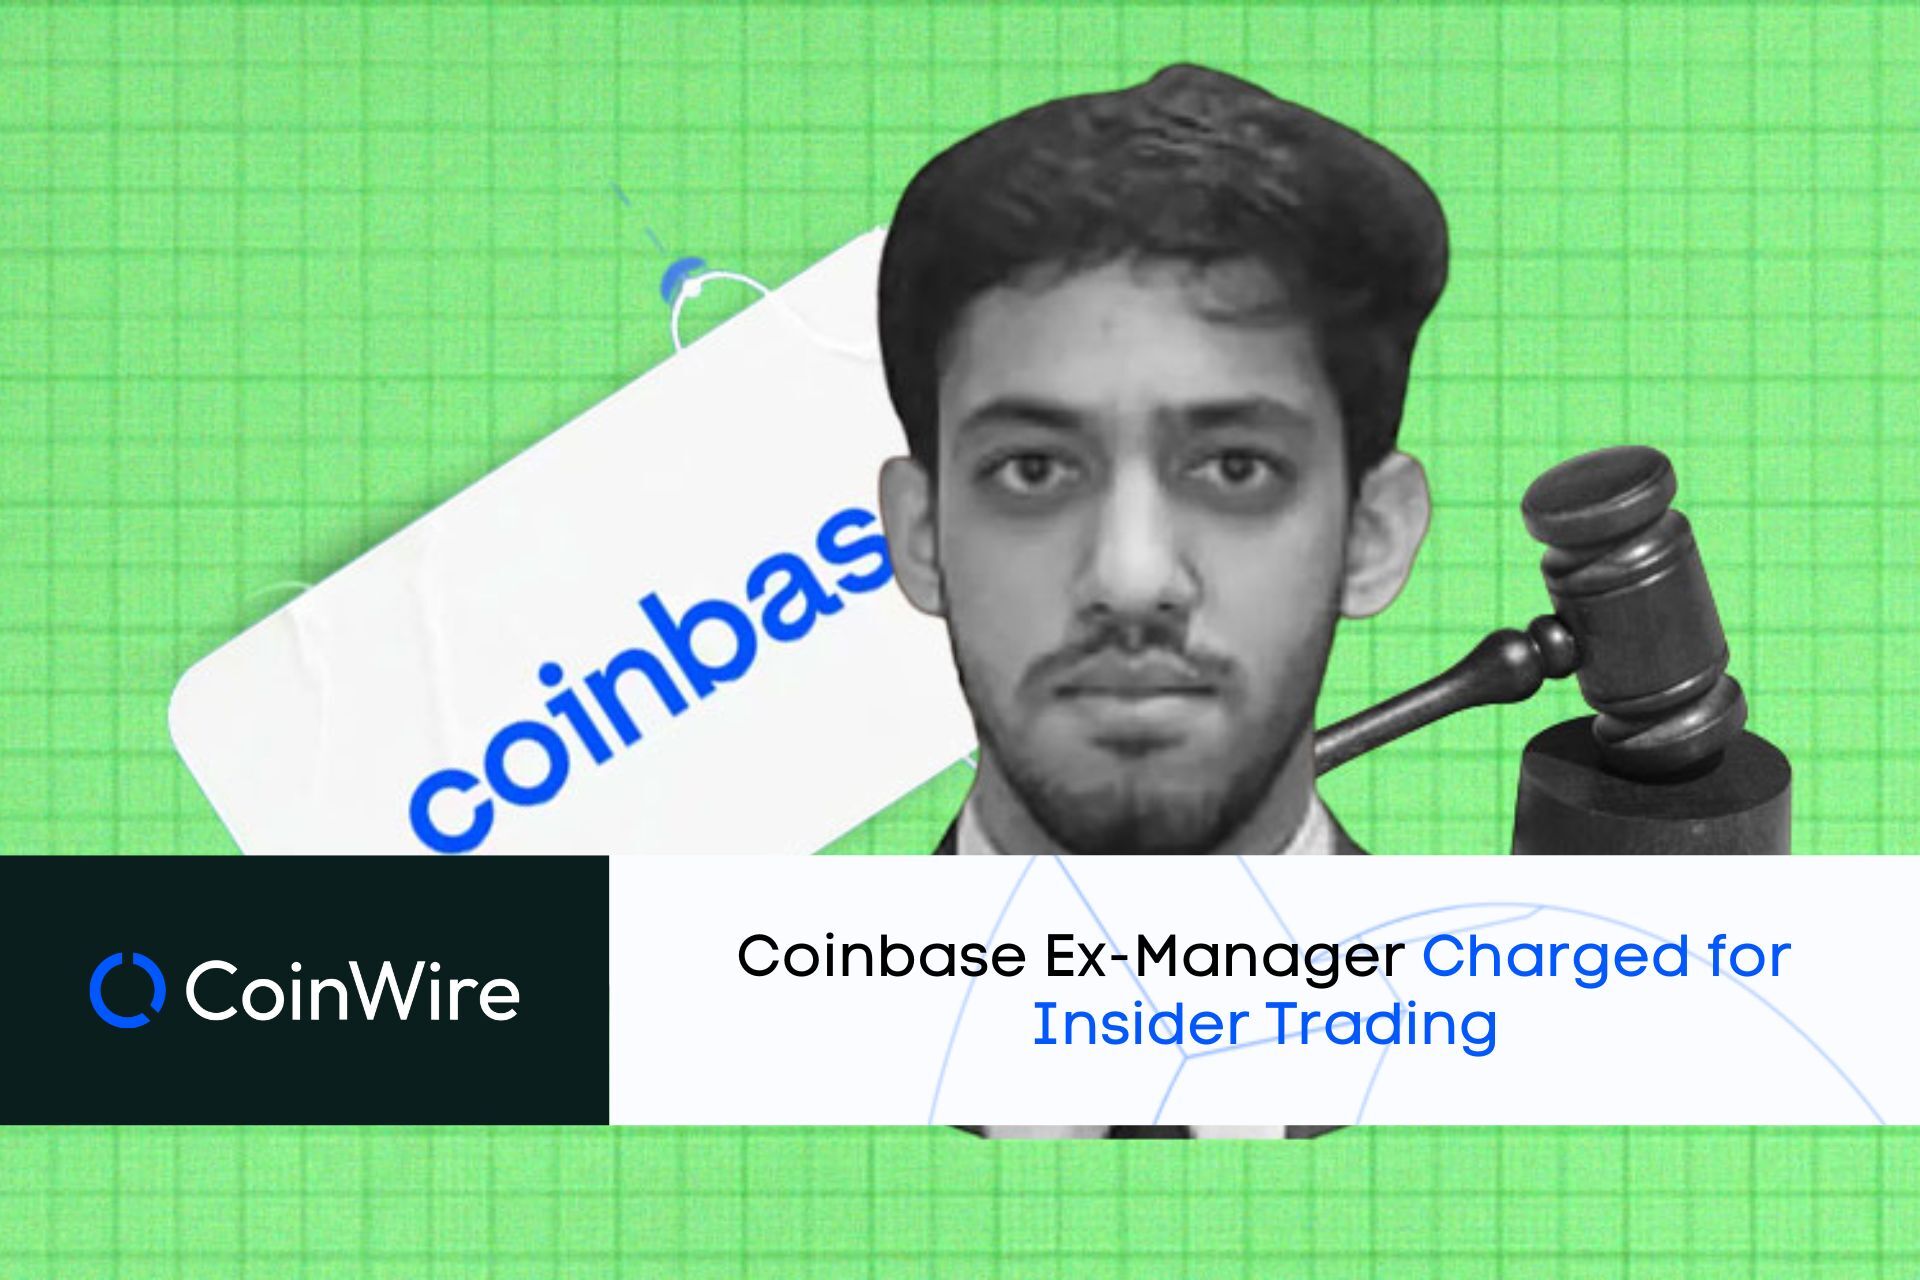 Coinbase Ex-Manager Charged For Insider Trading